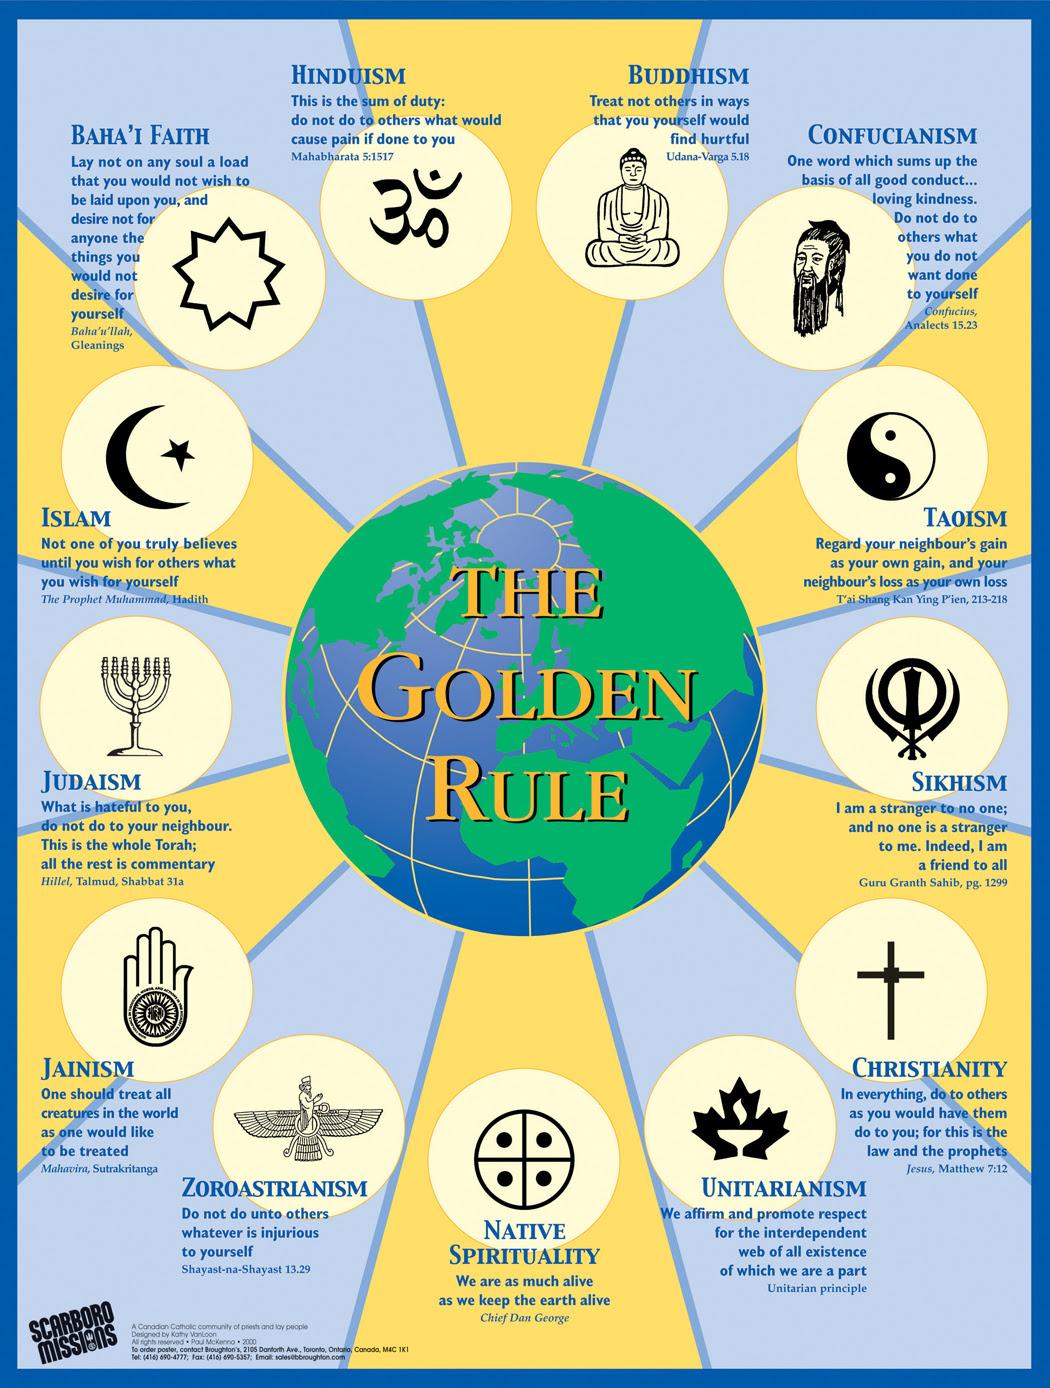 Paul McKenna and Kathy Murta  on The Golden Rule and Interreligious Dialogue